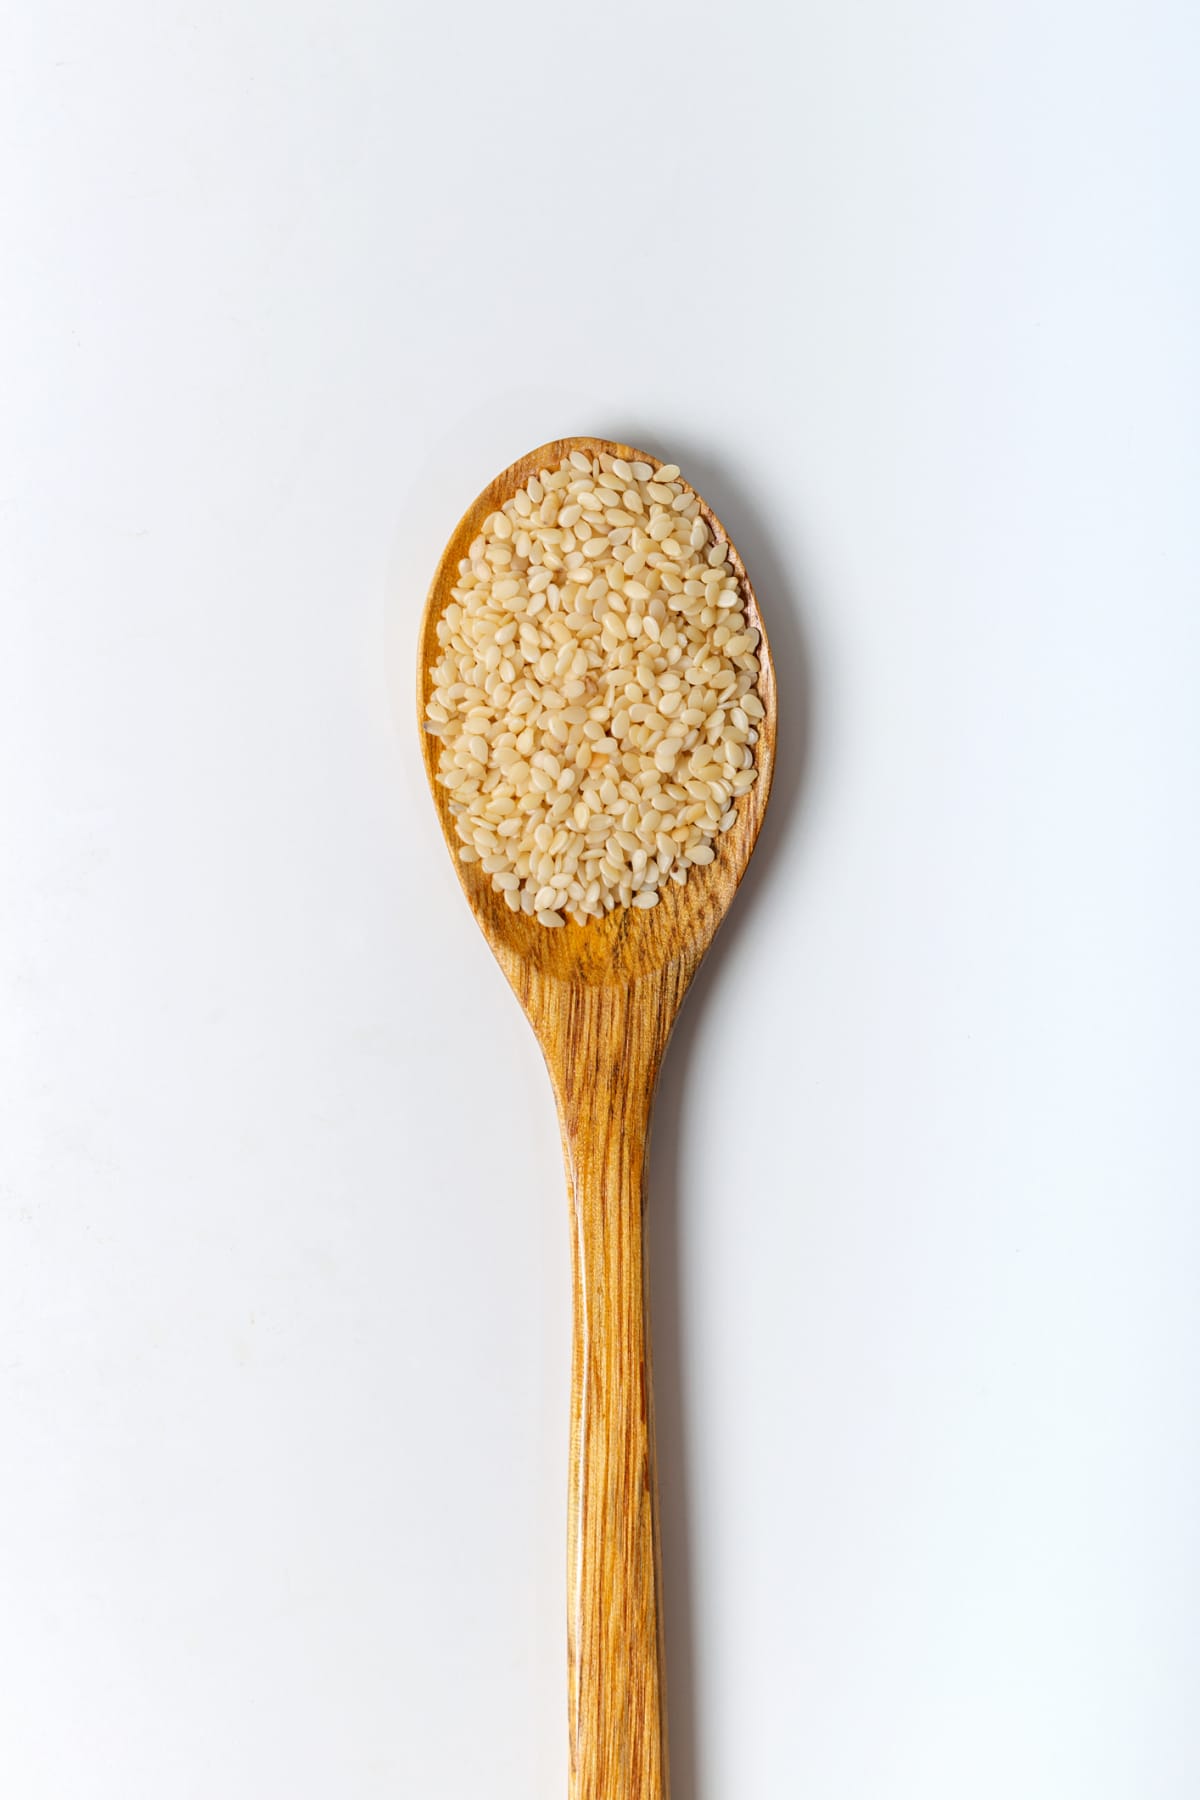 Sesame seeds in a wooden spoon isolated on white background